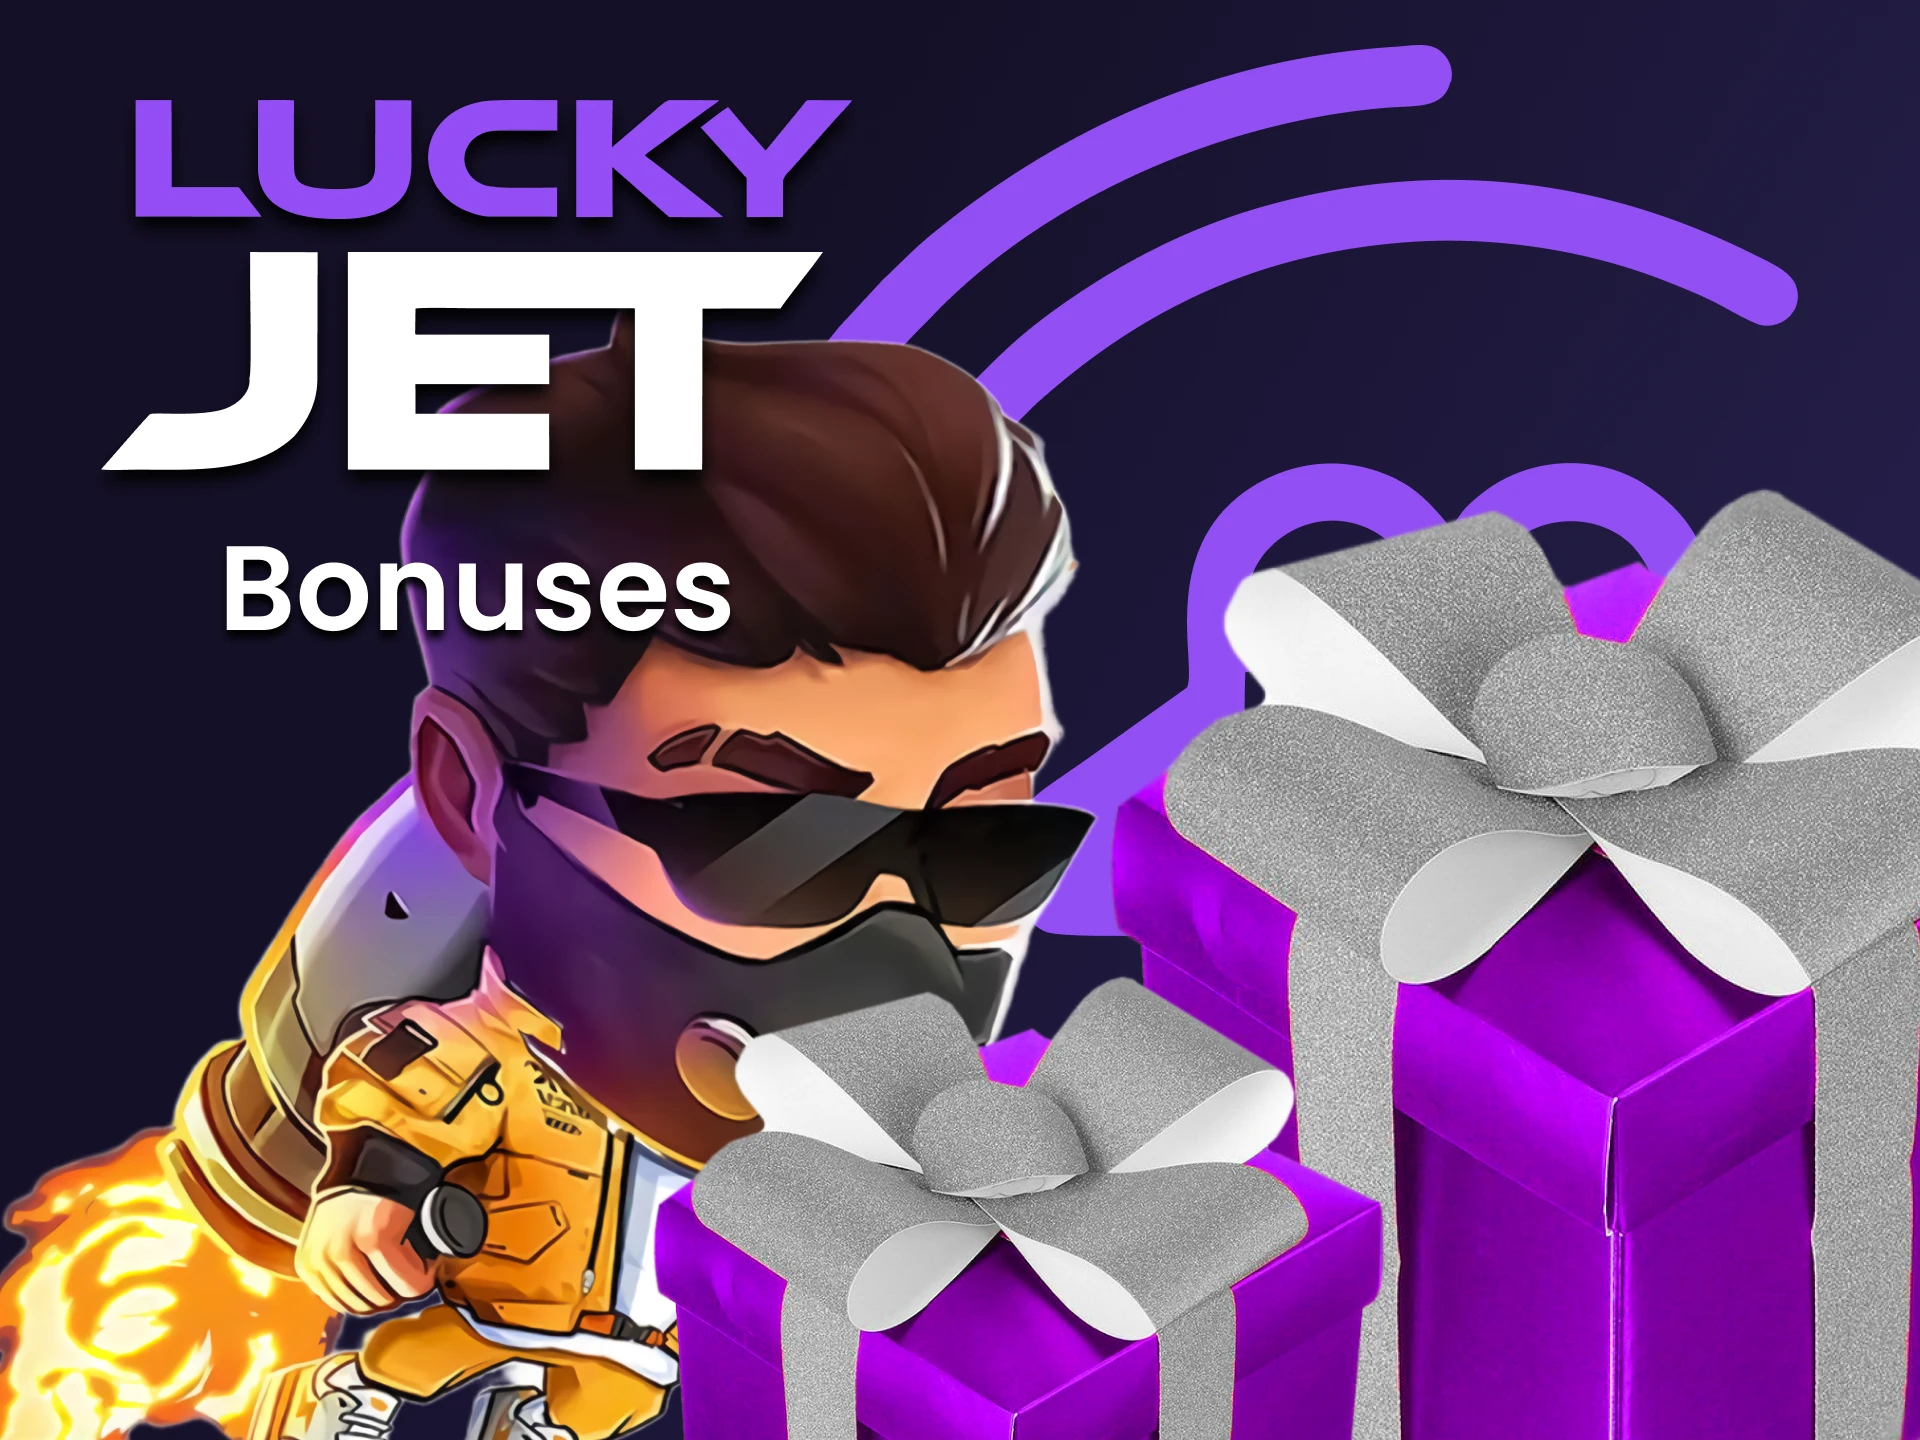 Find out about the many bonuses for Lucky Jet.